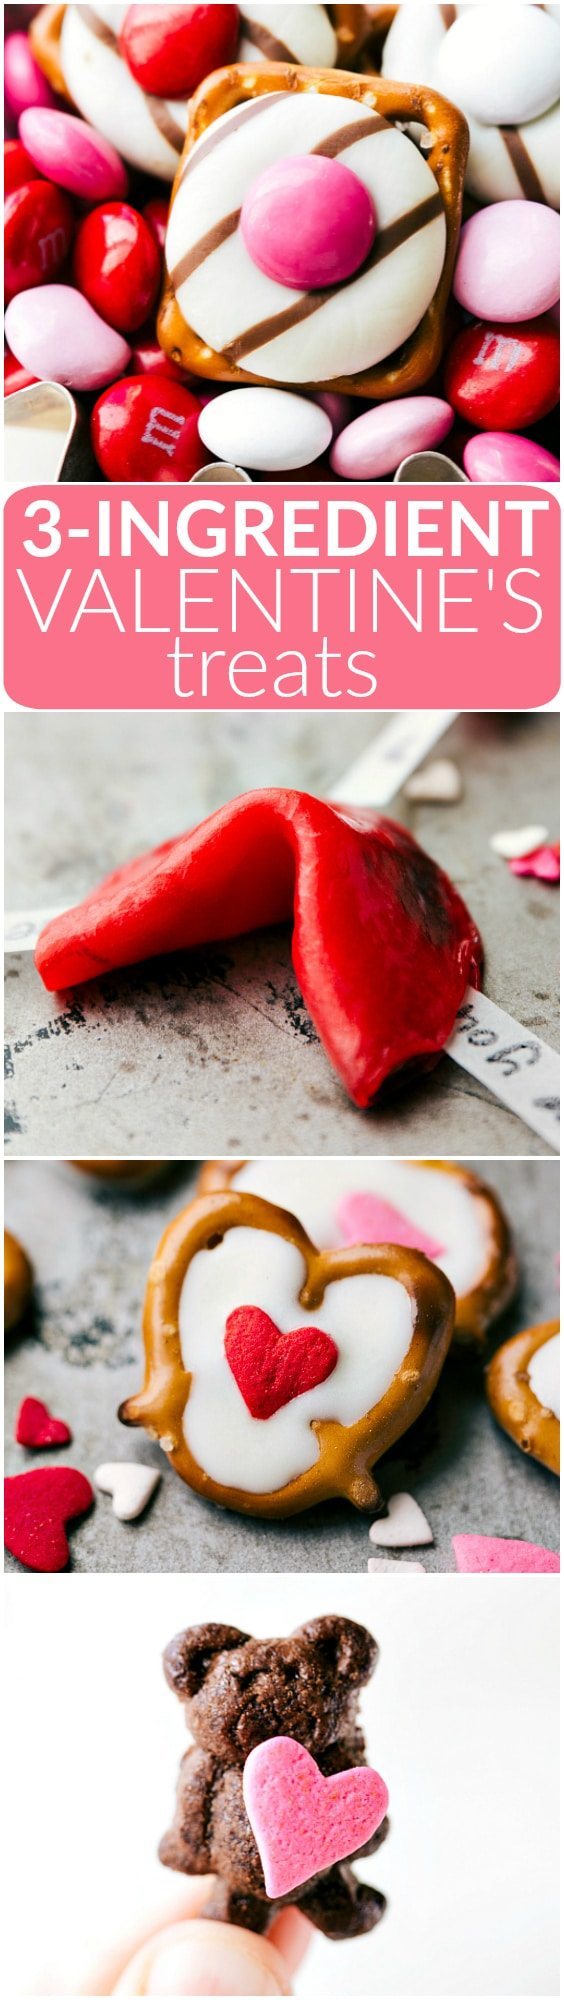 4 simple to make Valentine's Day Treats: heart hugs pretzels, love fortune cookies, mini Valentine bear holding a heart, and white chocolate heart pretzels. Each recipe requires 3 ingredients or less to make! Video tutorial included! Via chelseasmessyapron.com